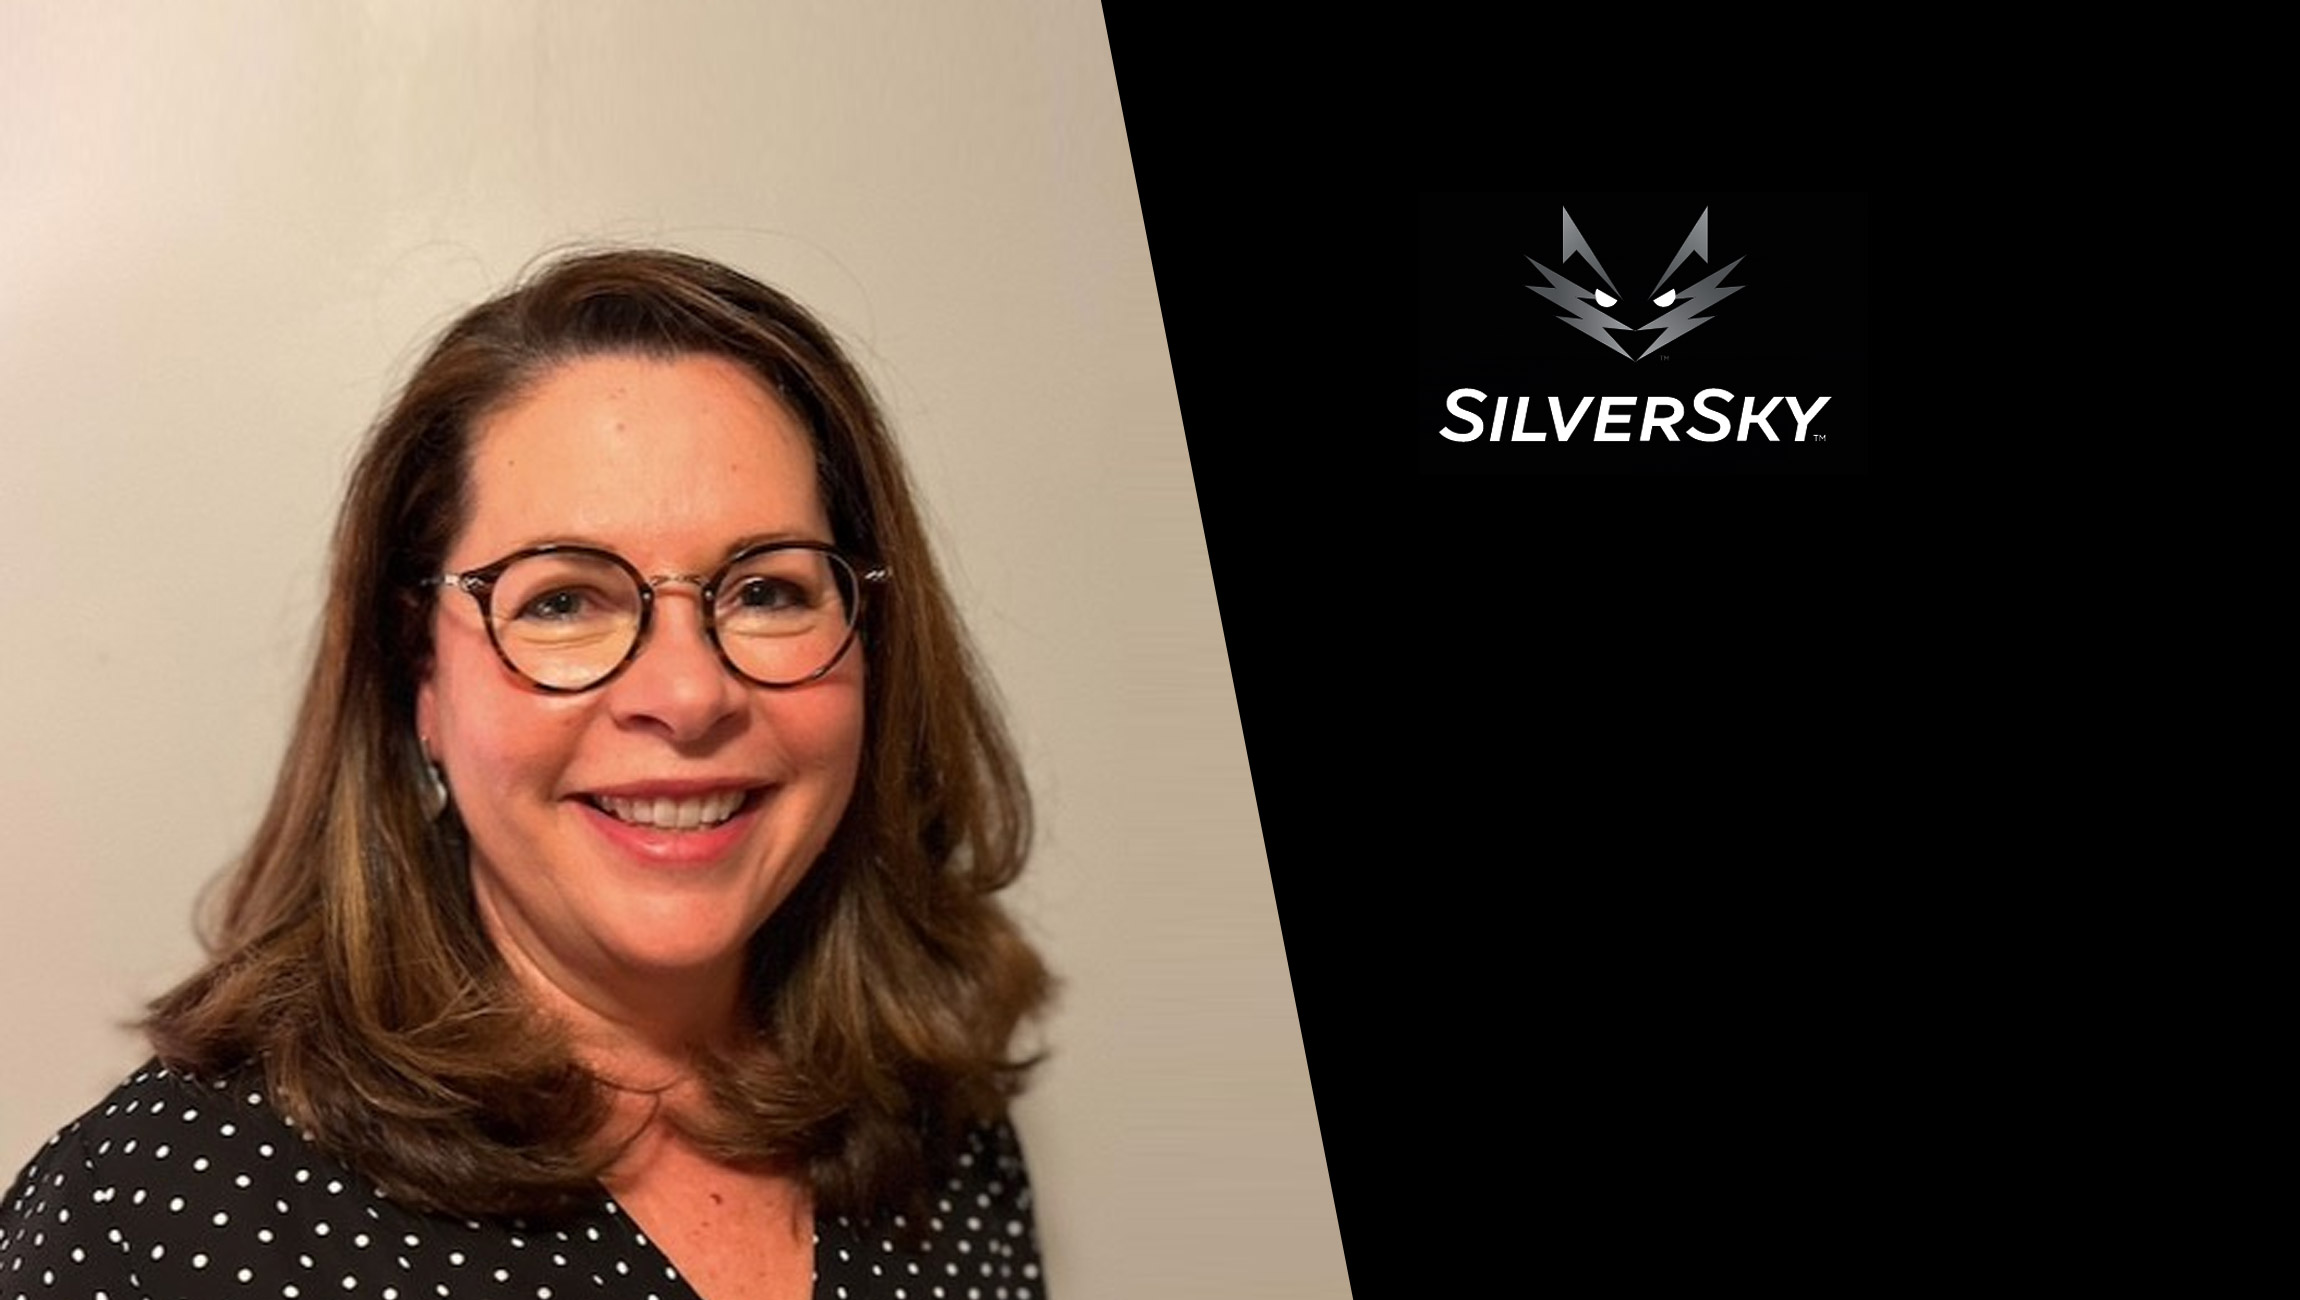 SilverSky Chief Revenue Officer Maureen Kaplan Recognized in 2022 Stevie Awards for Women in Business